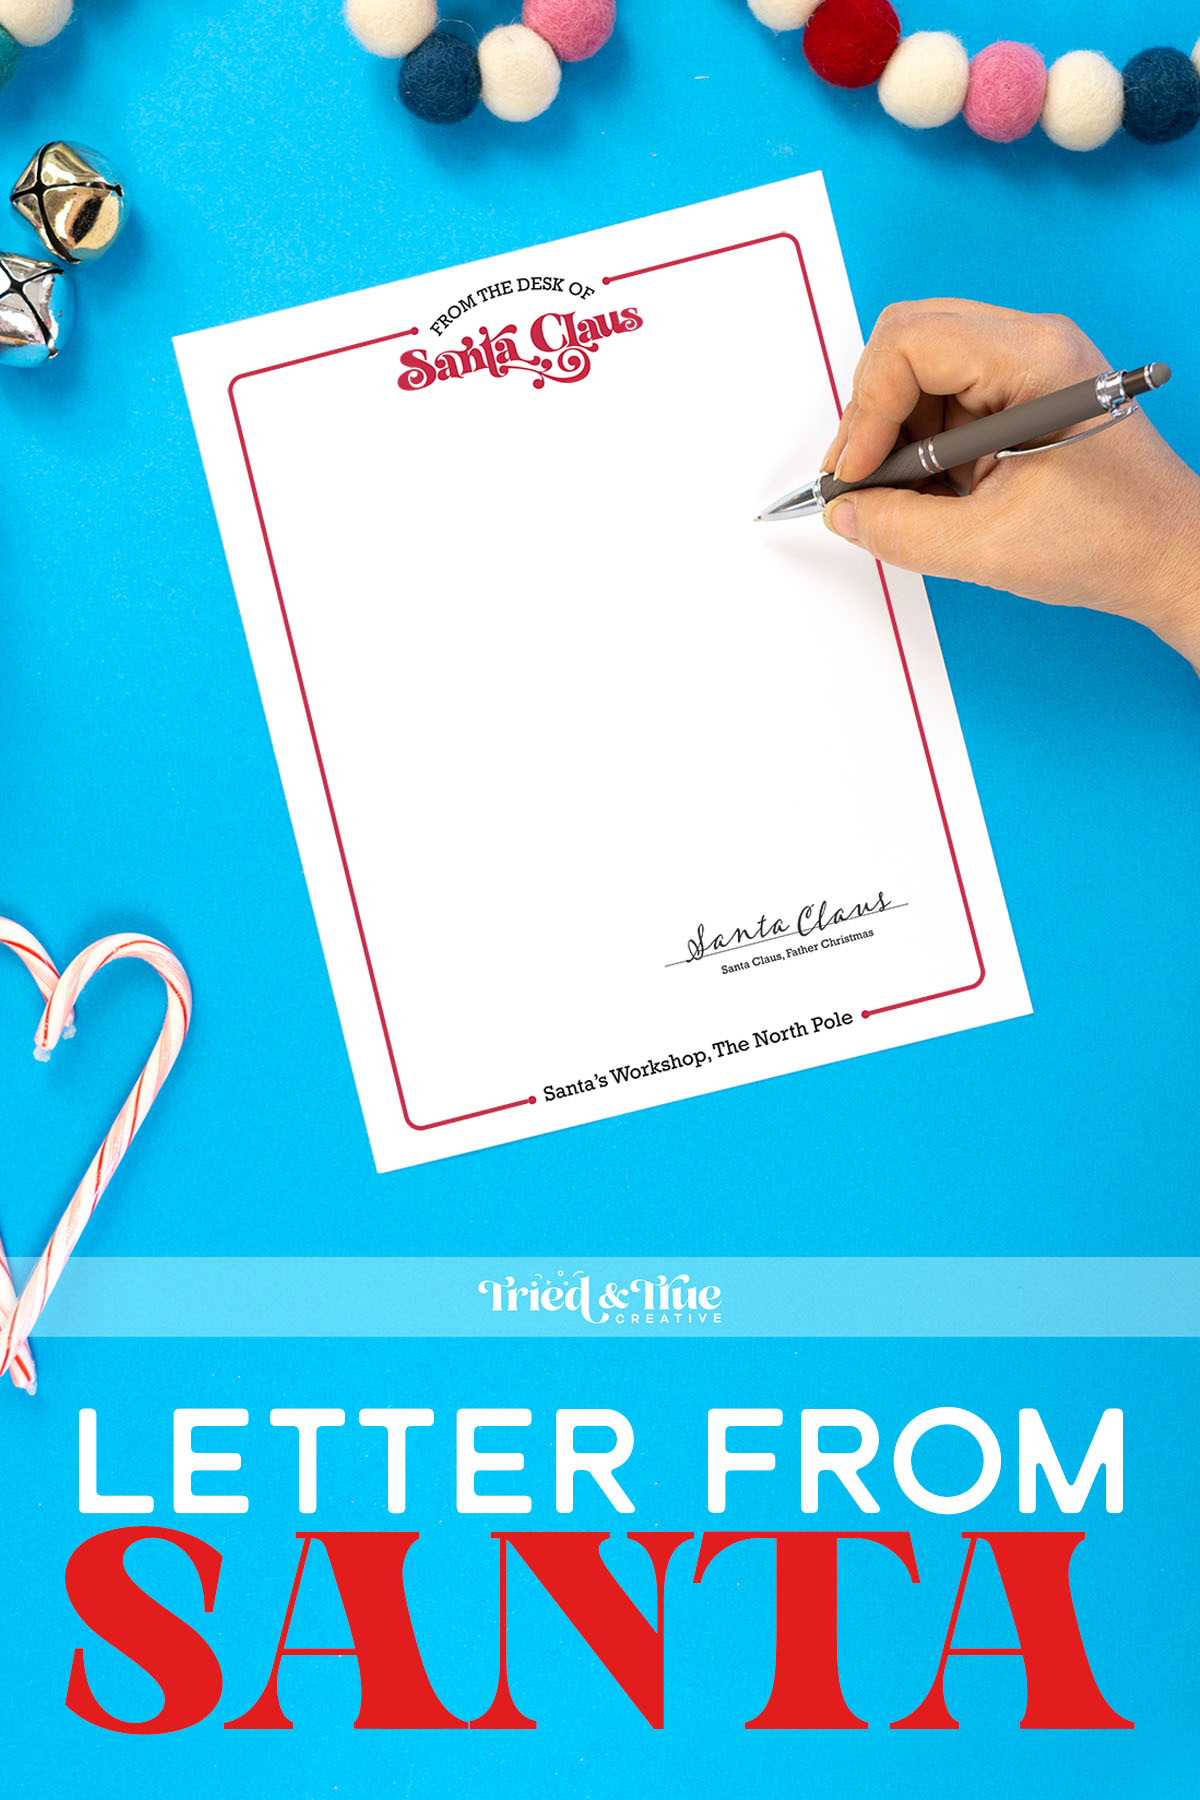 Hand writing on a letter from Santa on a blue background